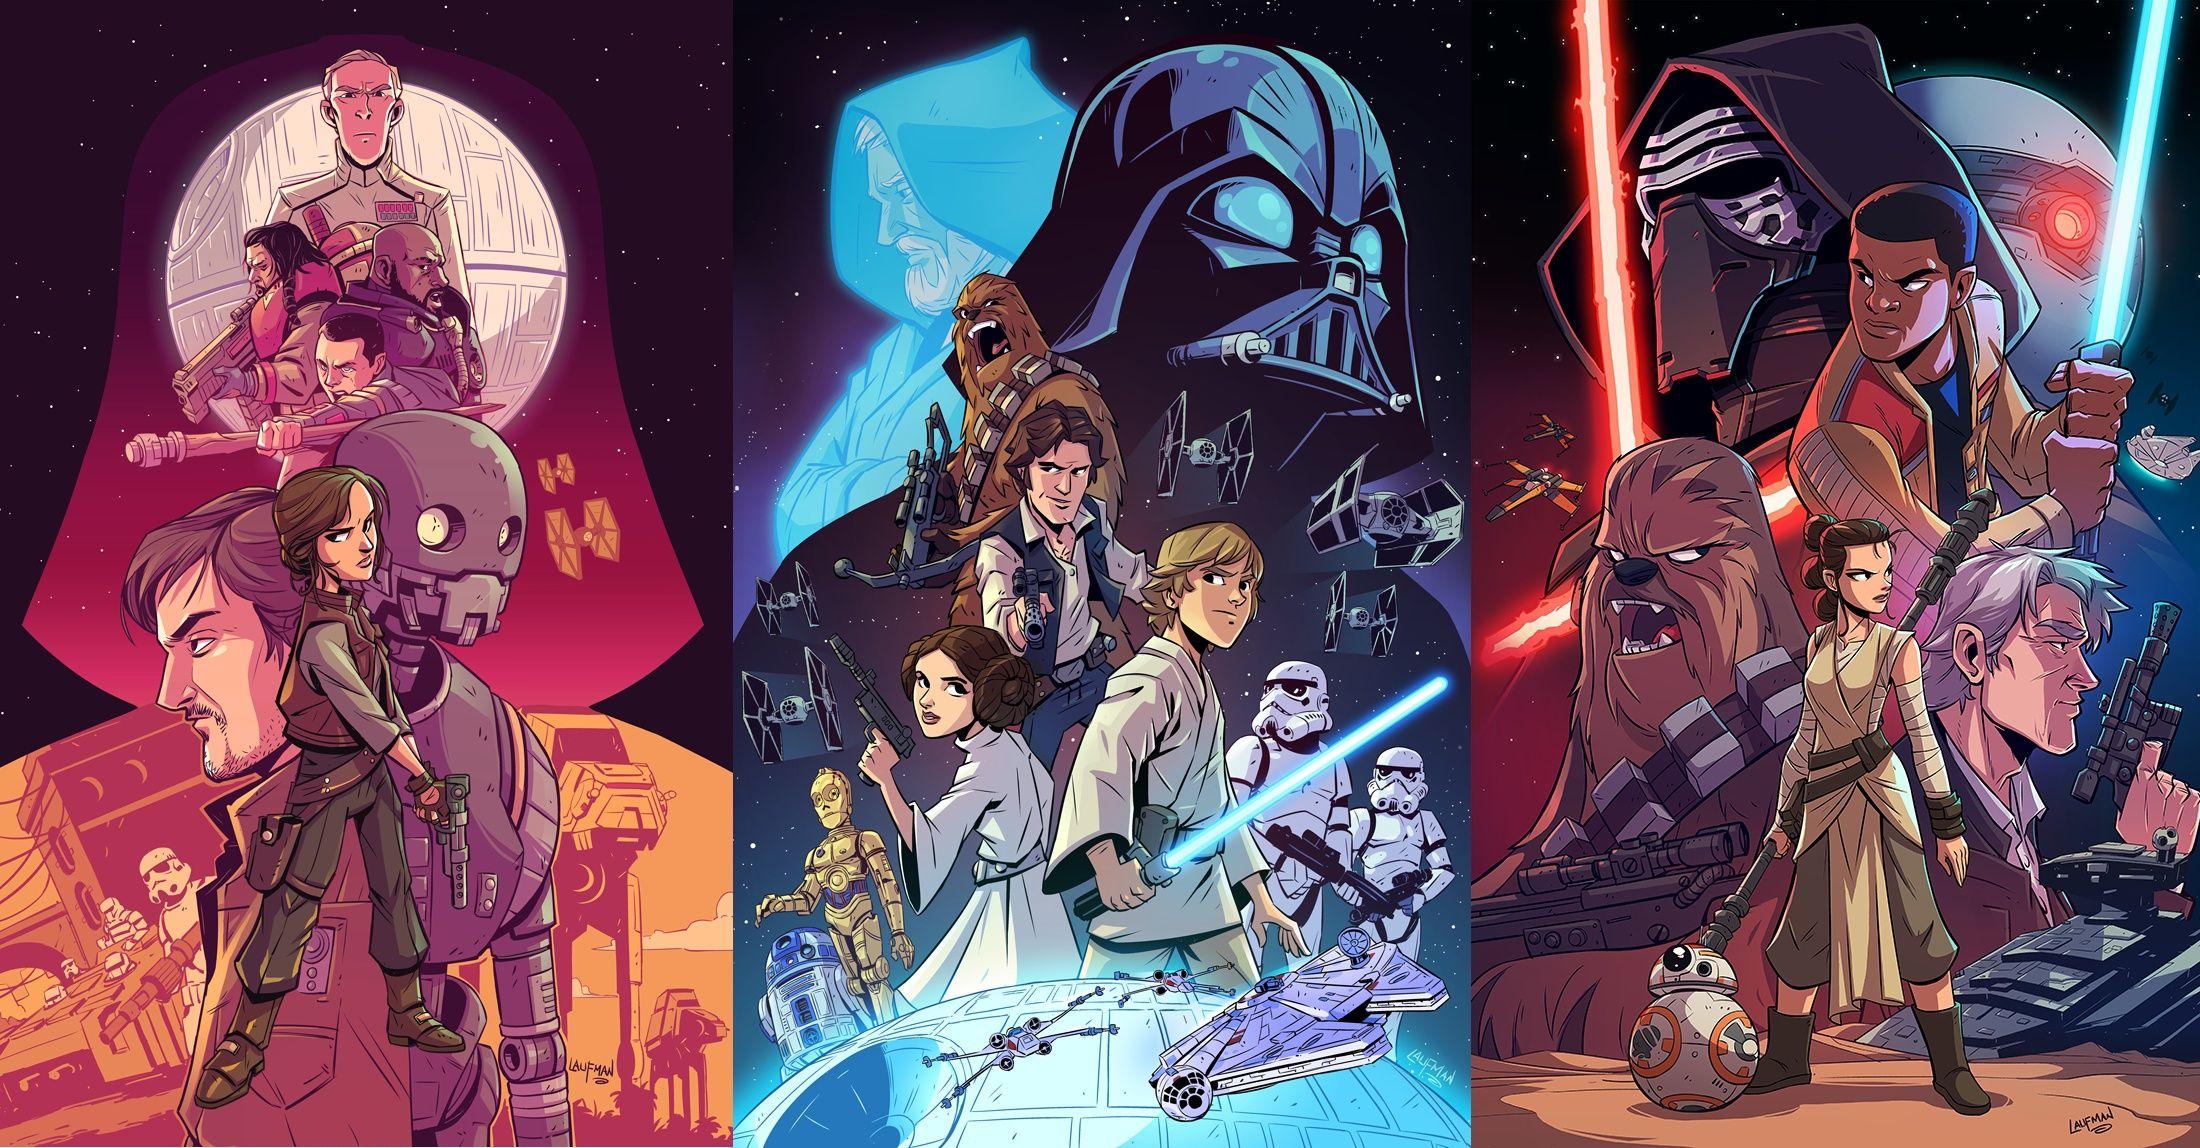 top rated animated series star wars wallpaper